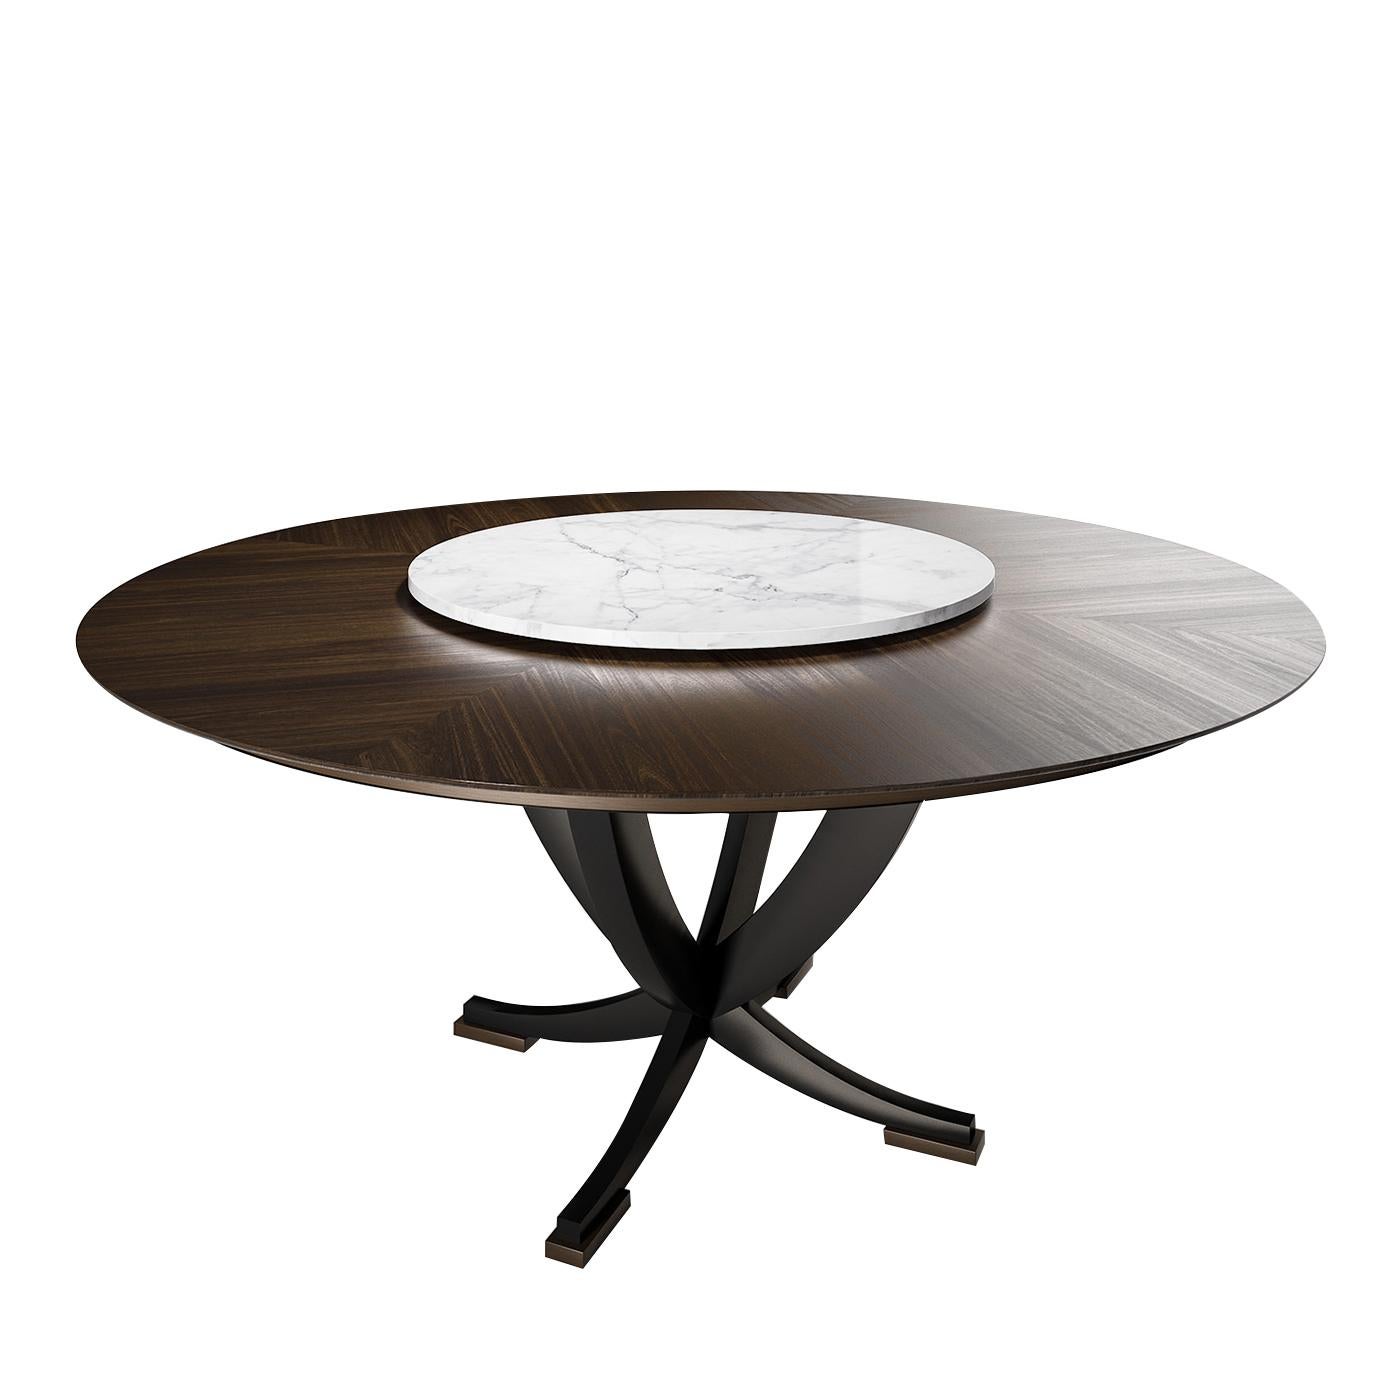 Characterized by a bold aesthetic and a chiaroscuro visual contrast, this luxurious dining table will complement any modern interior. Supported by a sophisticated shape of intersecting wooden C-shaped legs, enhanced by a black velvet-like finish and